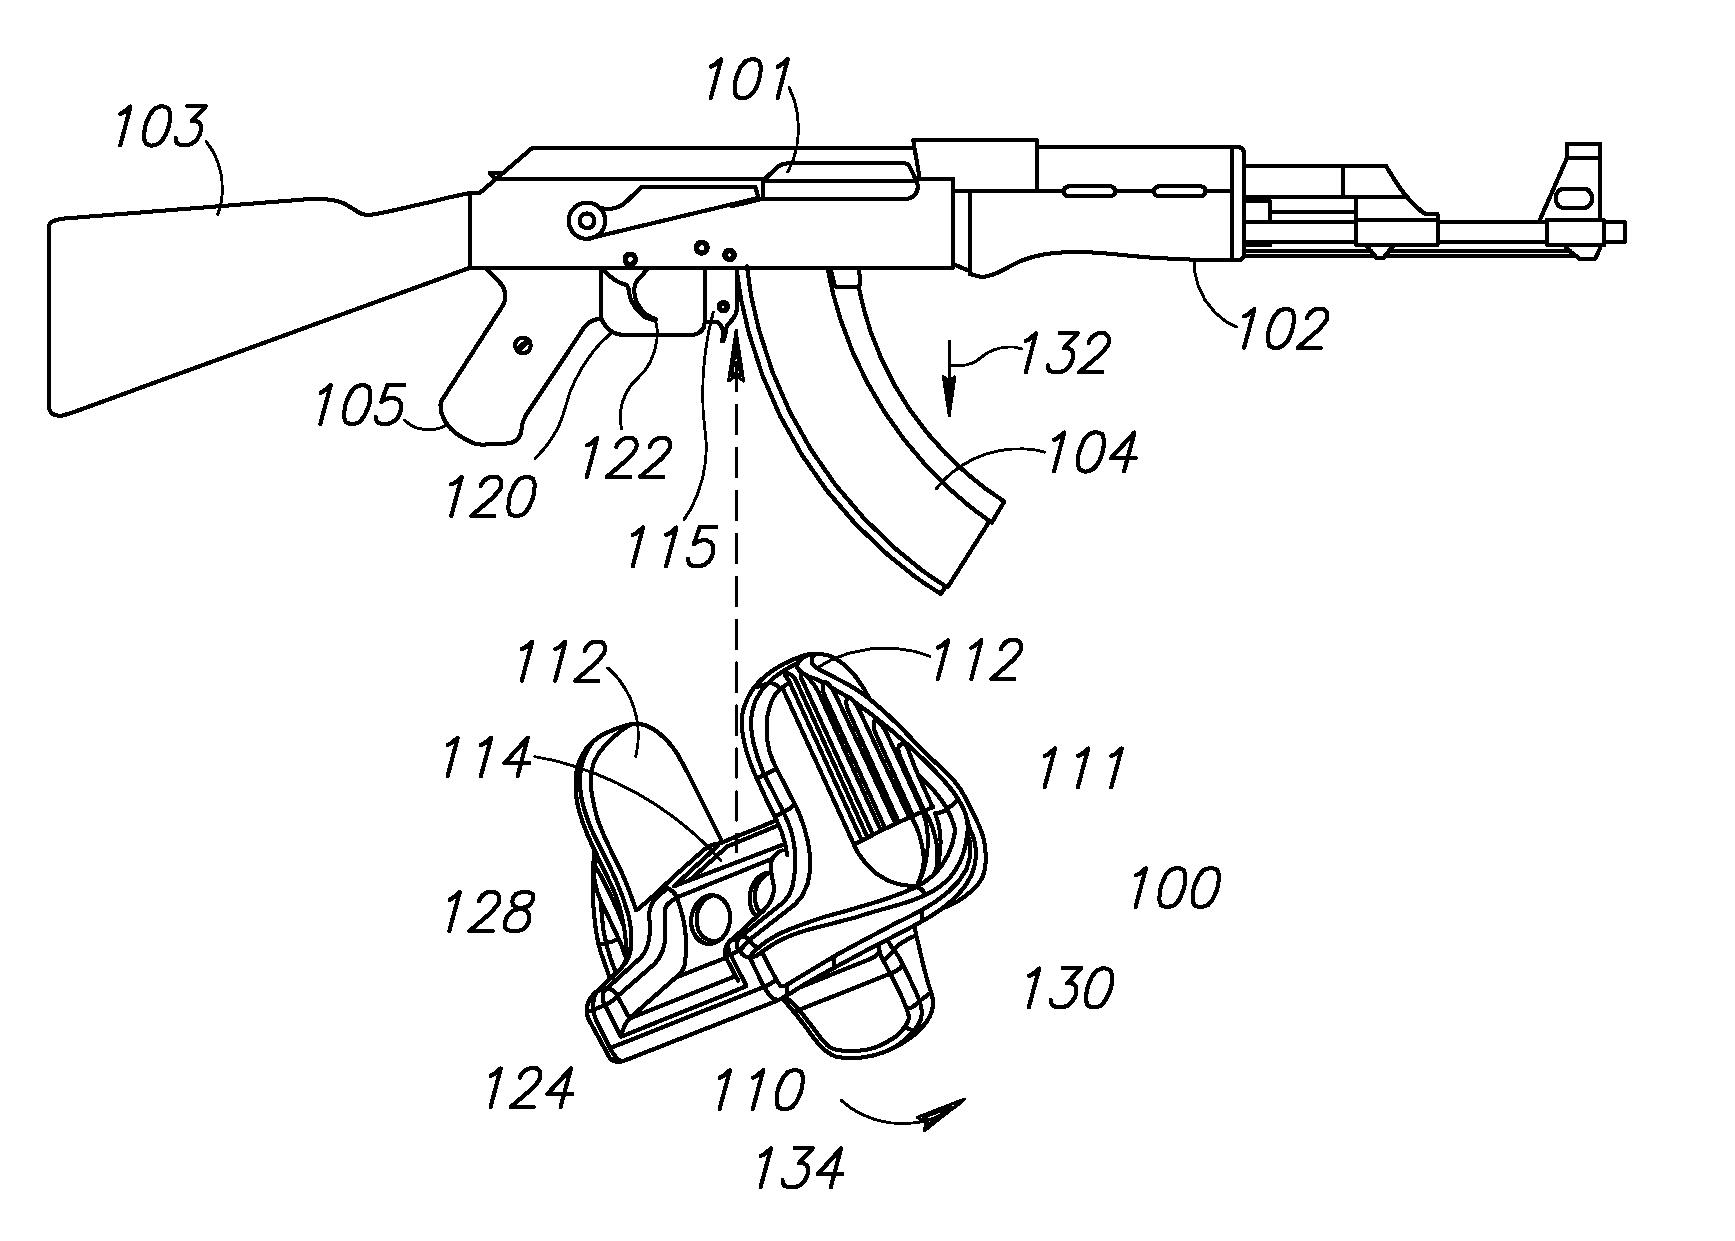 Assault rifle magazine ejector extension